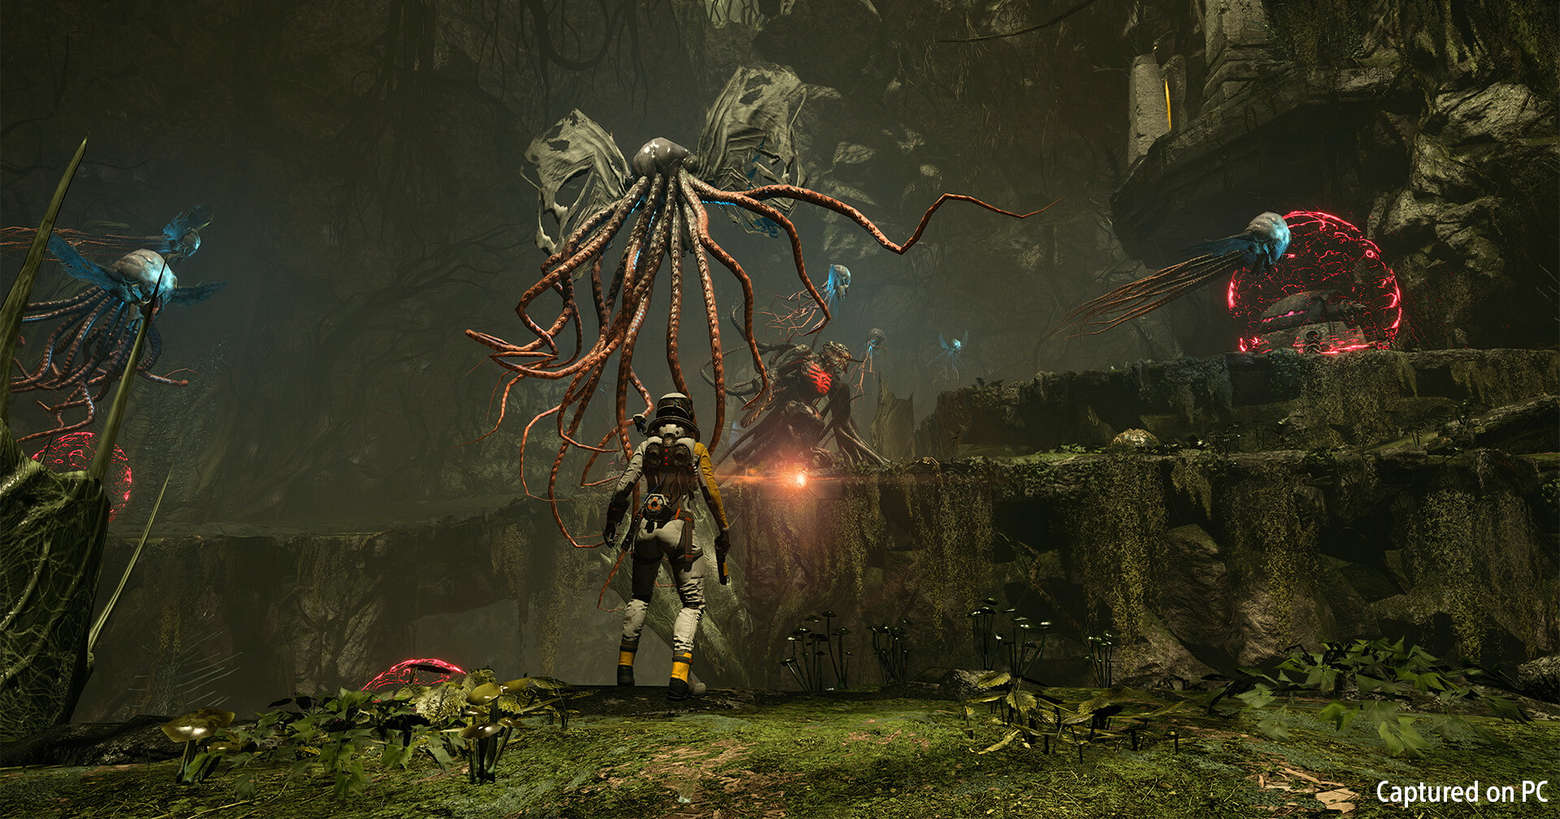 The main character from Returnal faces giant floating octopus-like creatures in a cave. The game is also available for PC as of today.